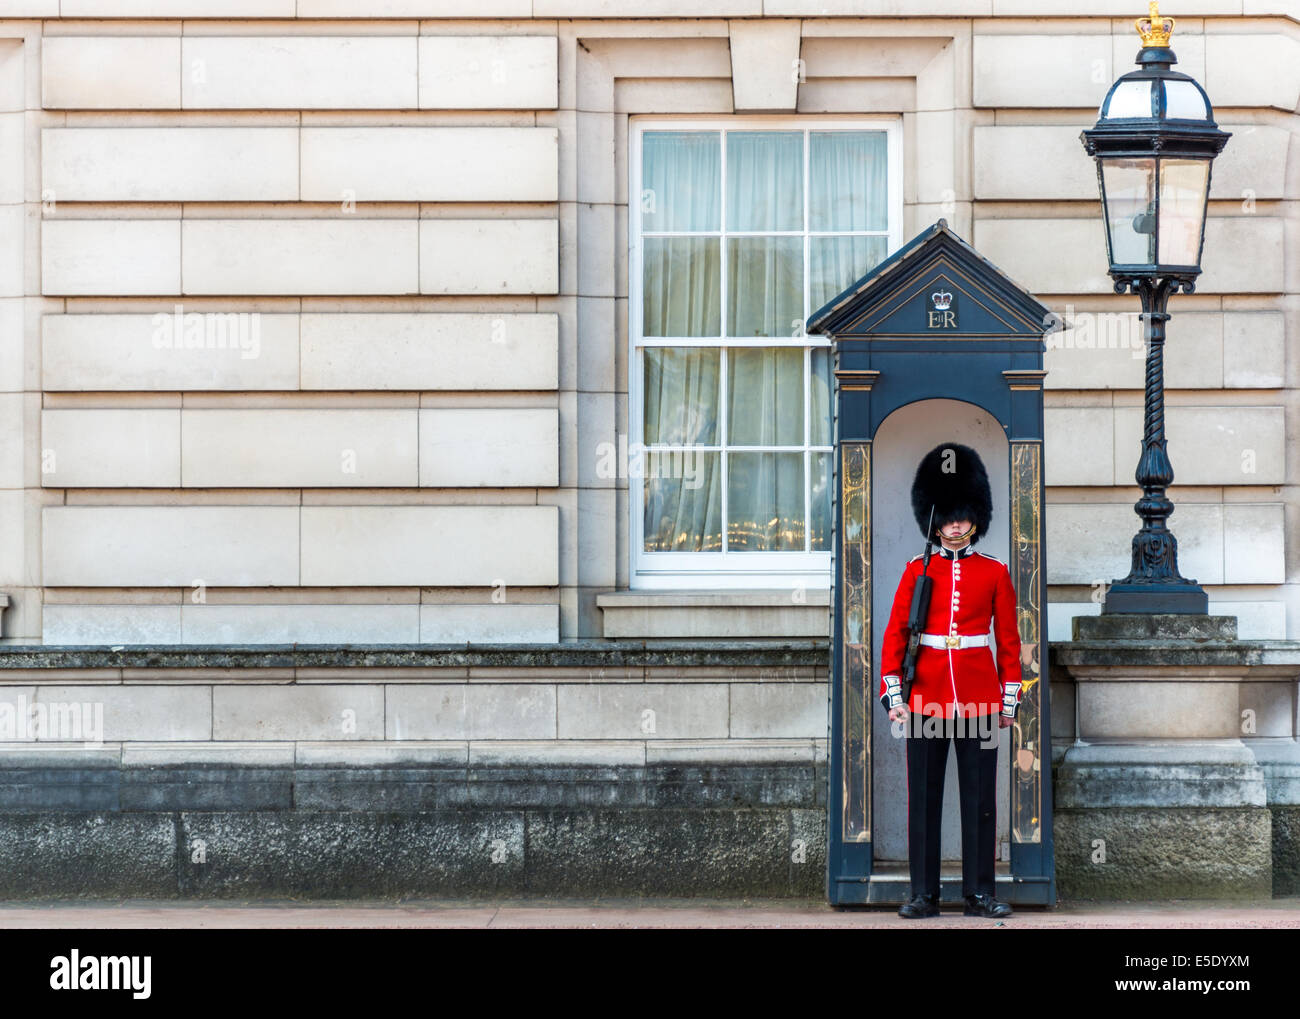 A Guardsman stands in a sentry box at Buckingham Palace, guarding the Queen of England. Stock Photo